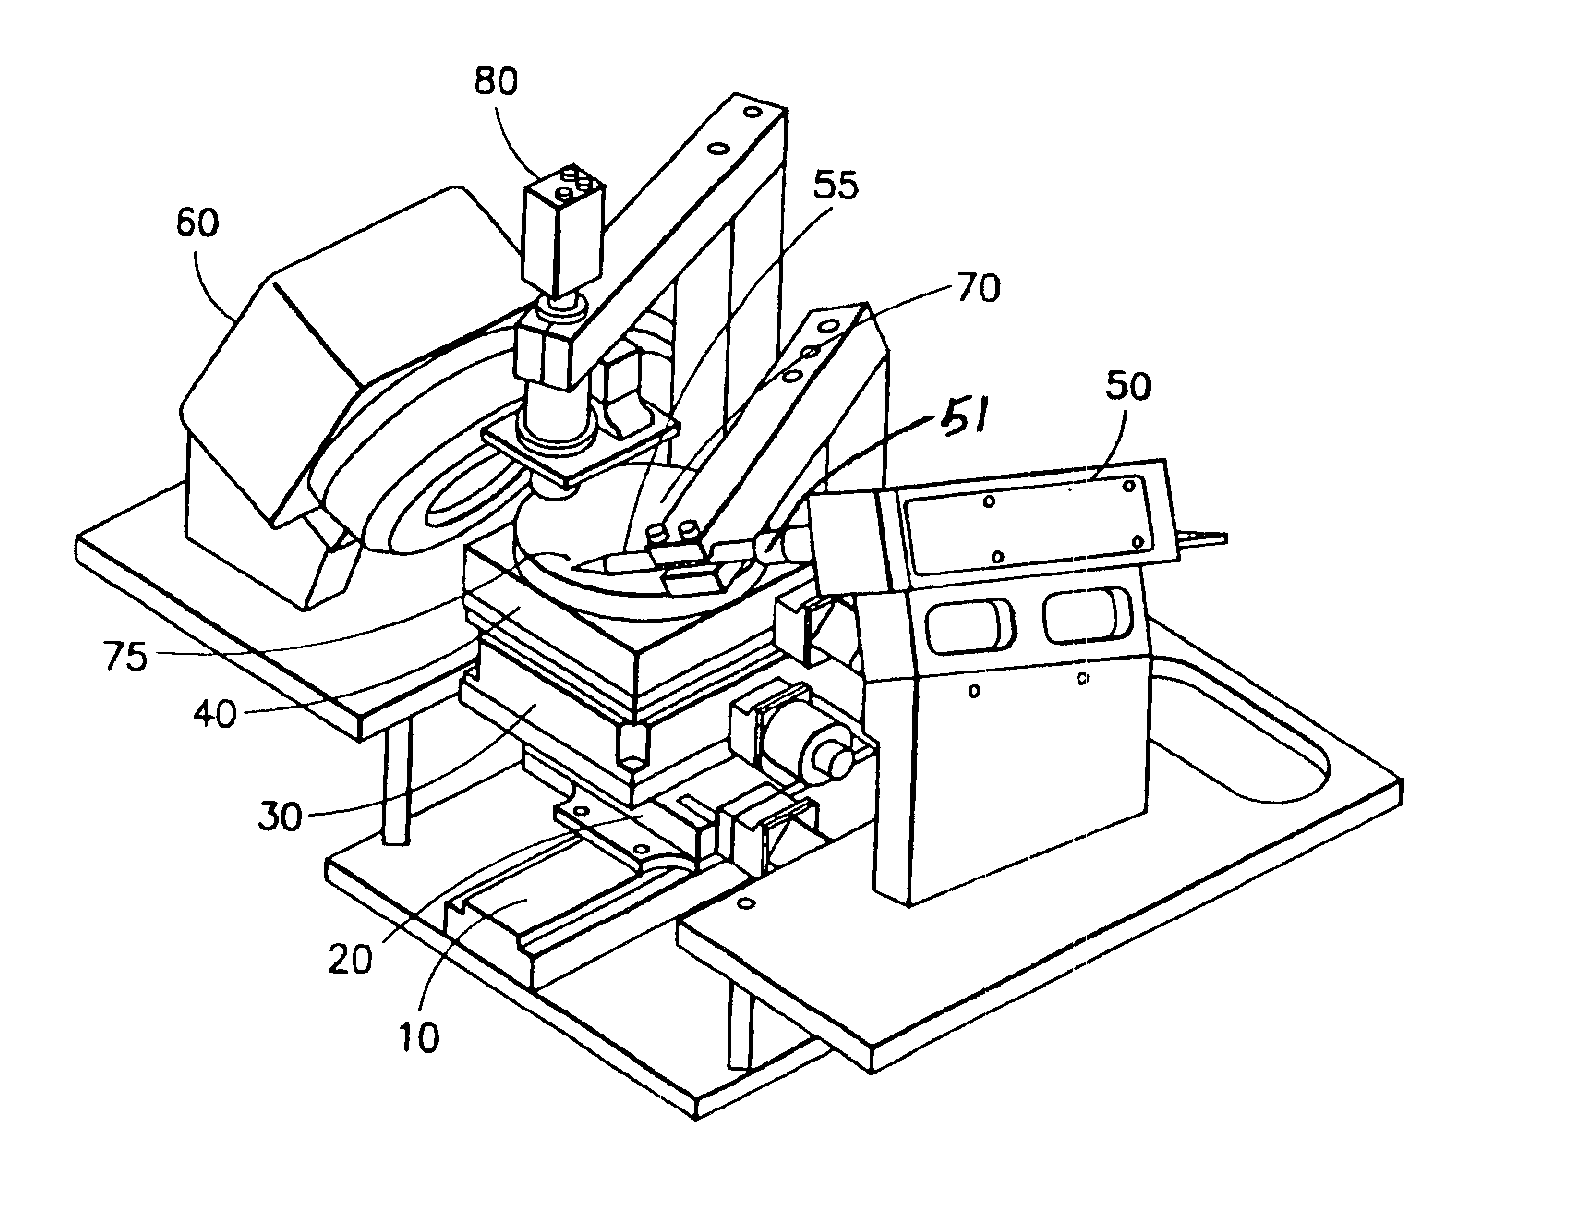 Method and apparatus for rapid grain size analysis of polycrystalline materials